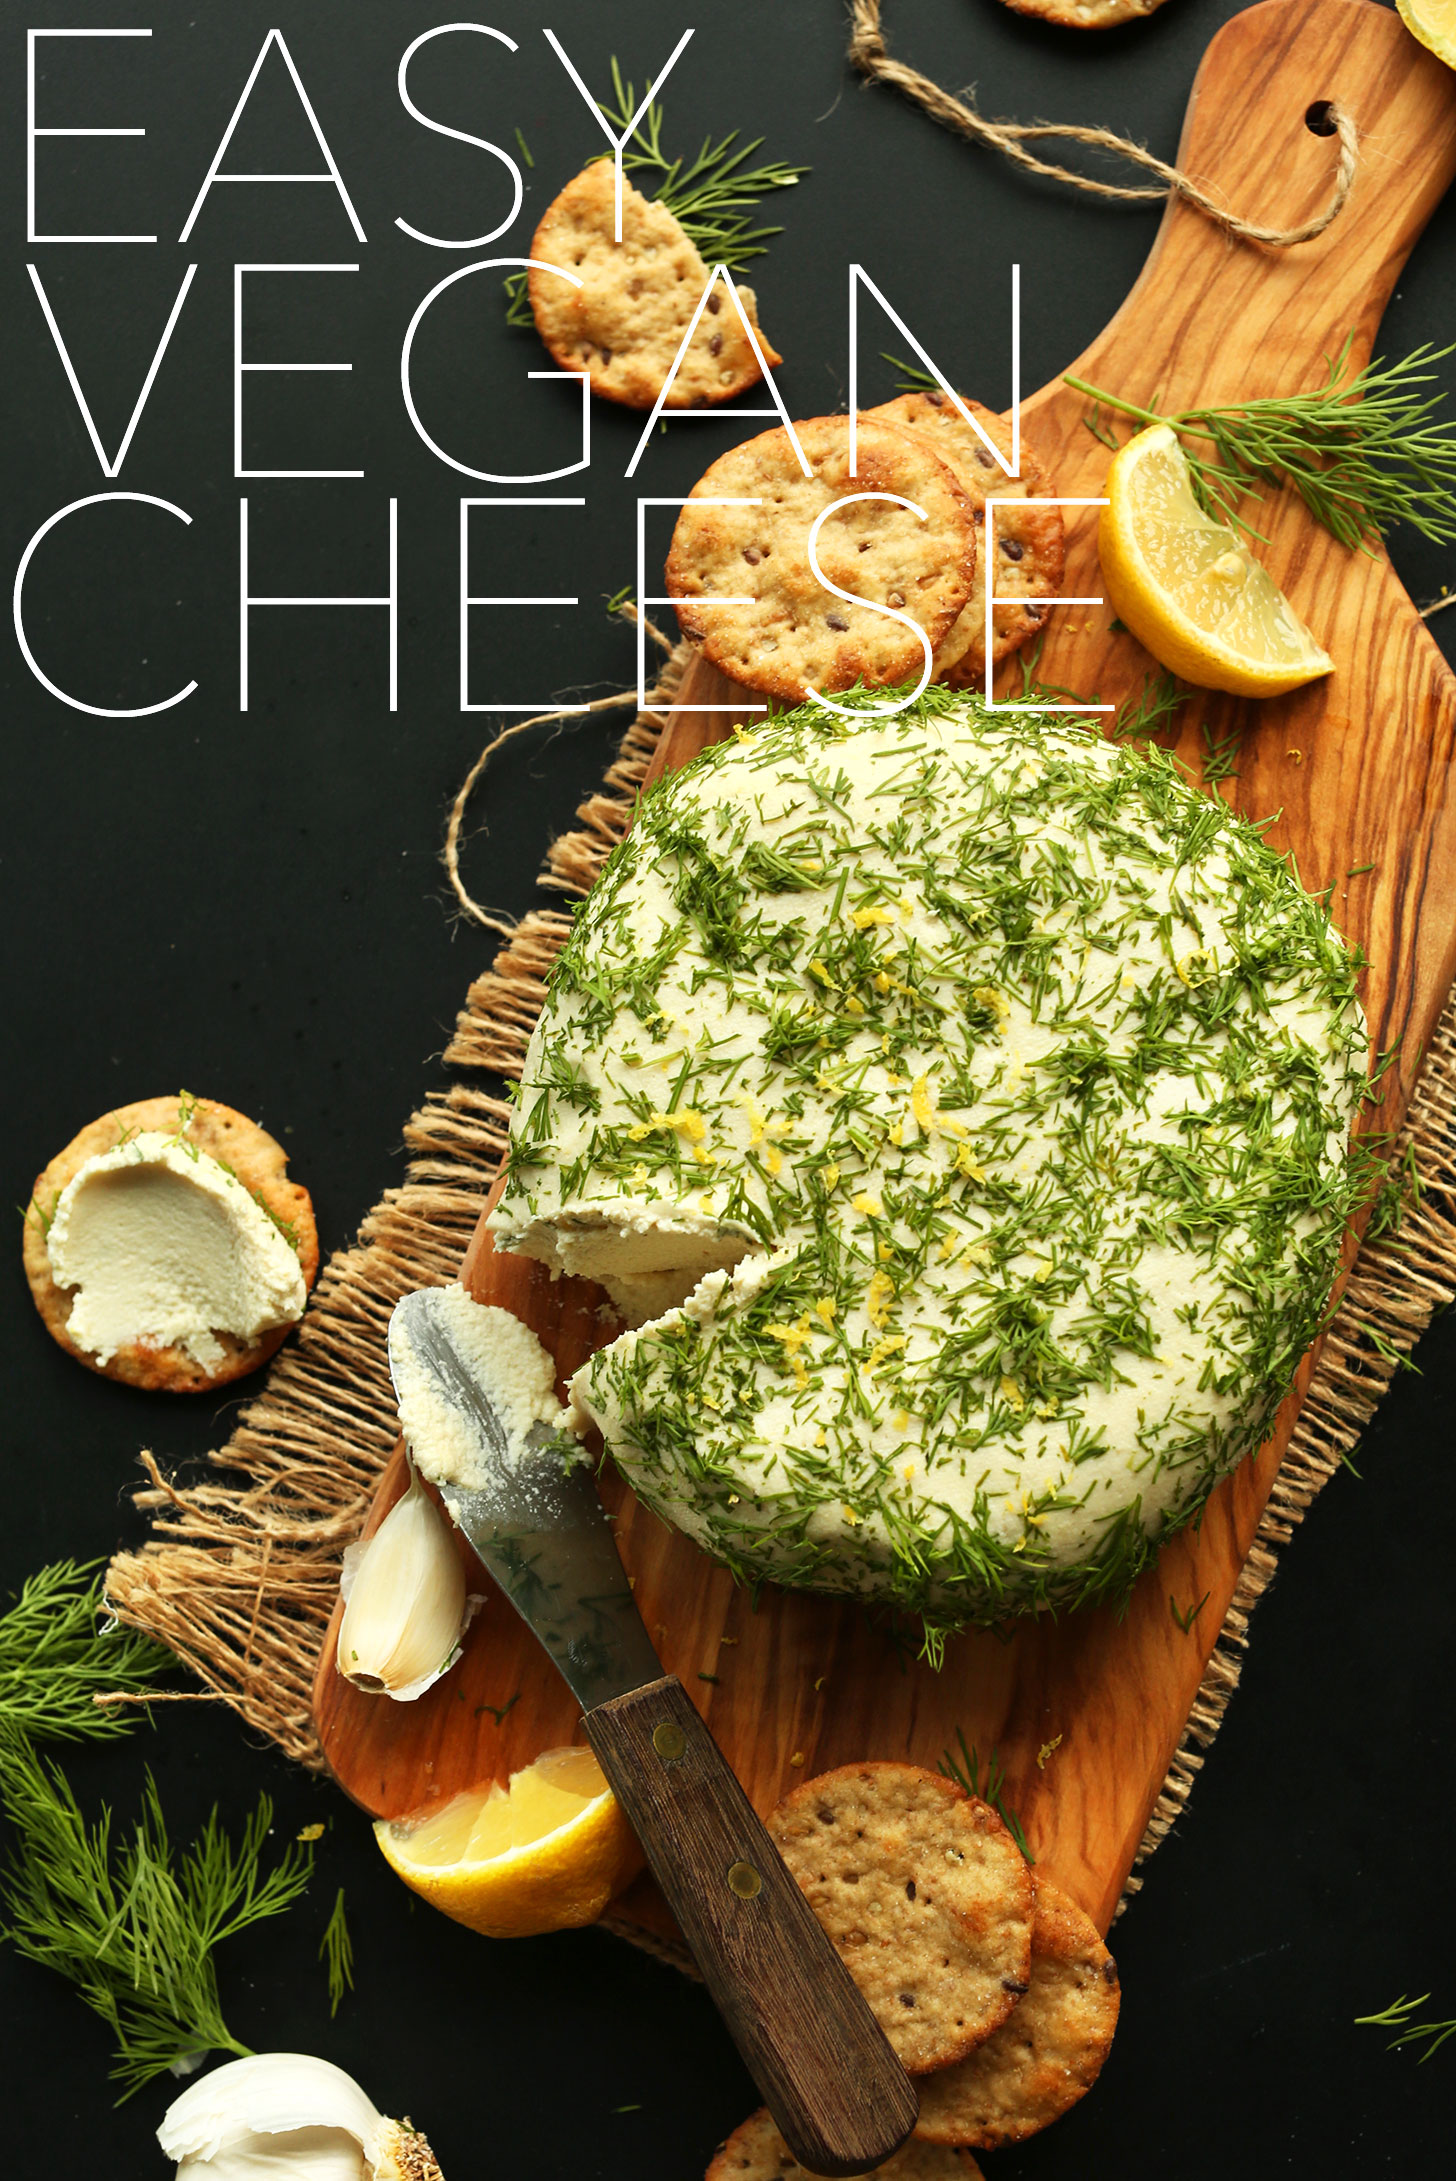 Our Easy Vegan Cheese Wheel topped with fresh dill and lemon zest on a cutting board with crackers